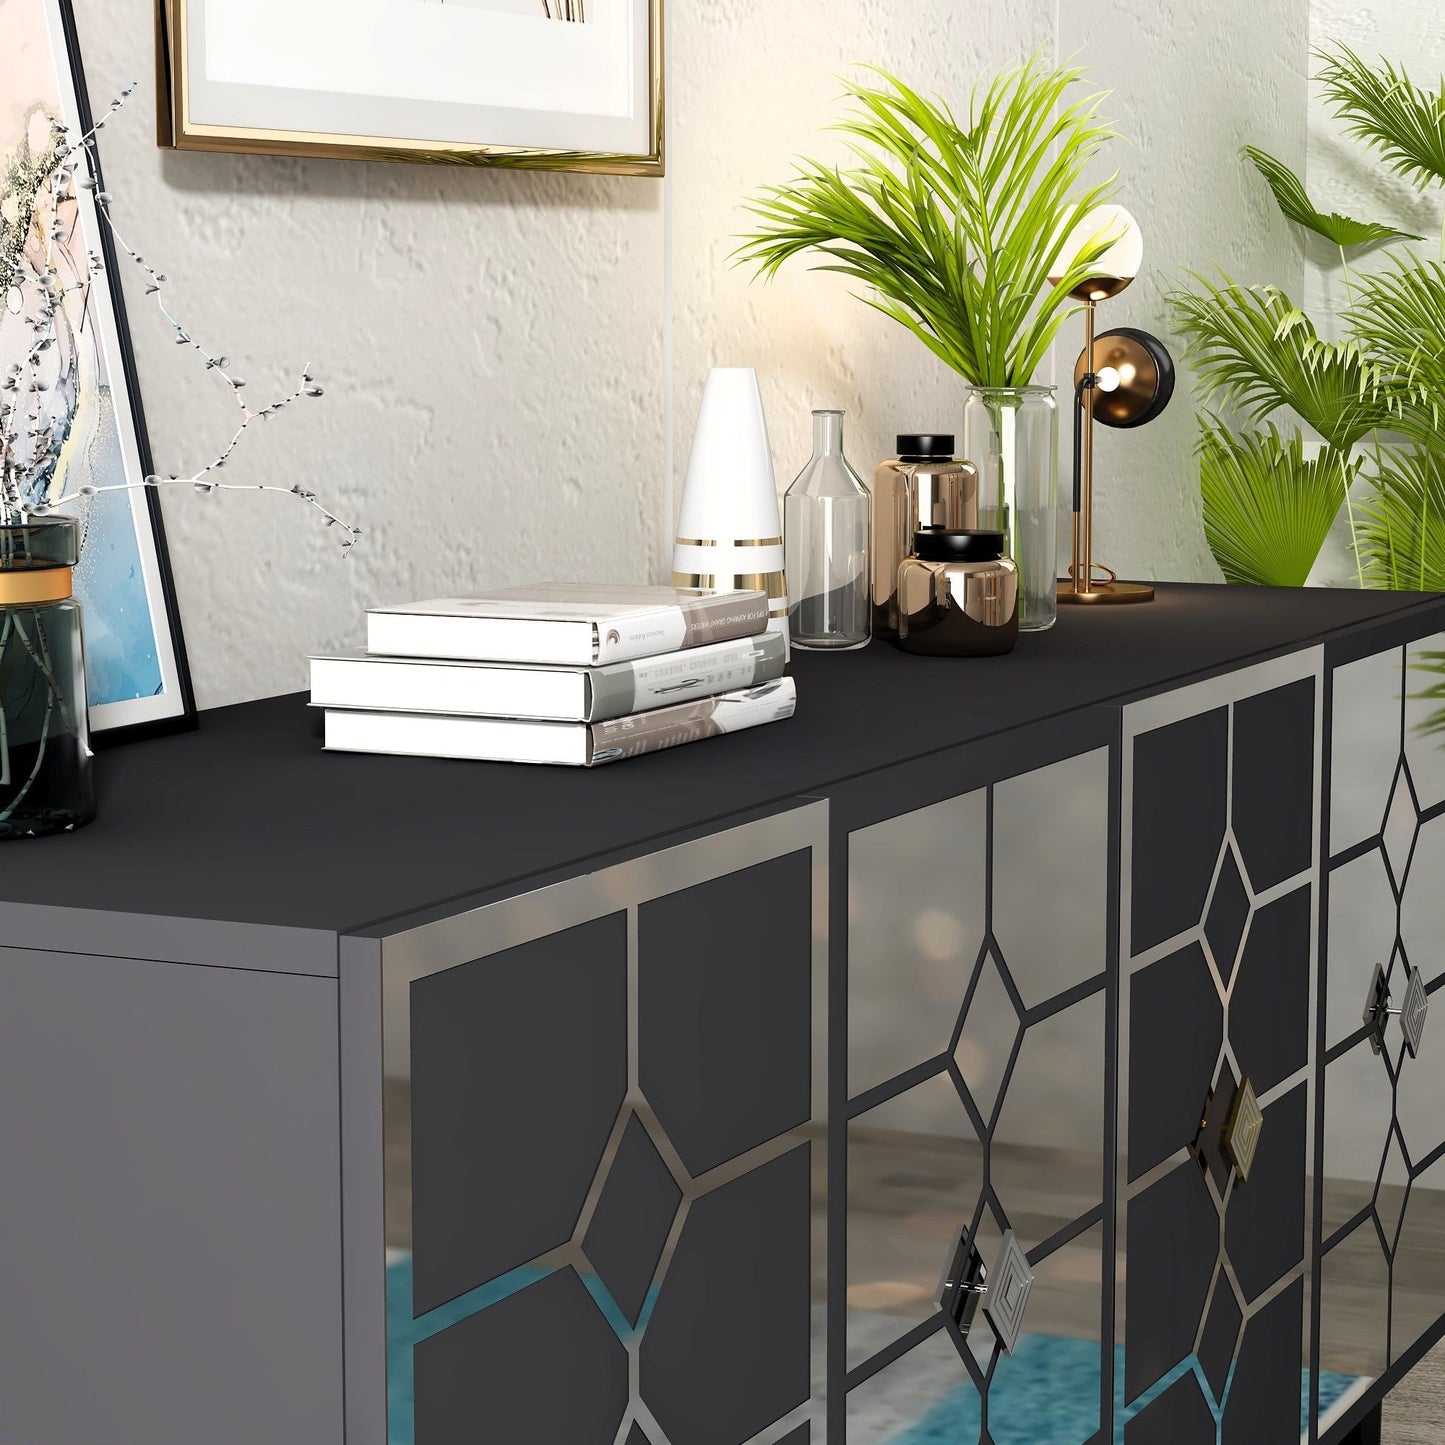 Irmak - Anthracite, Silver - Console